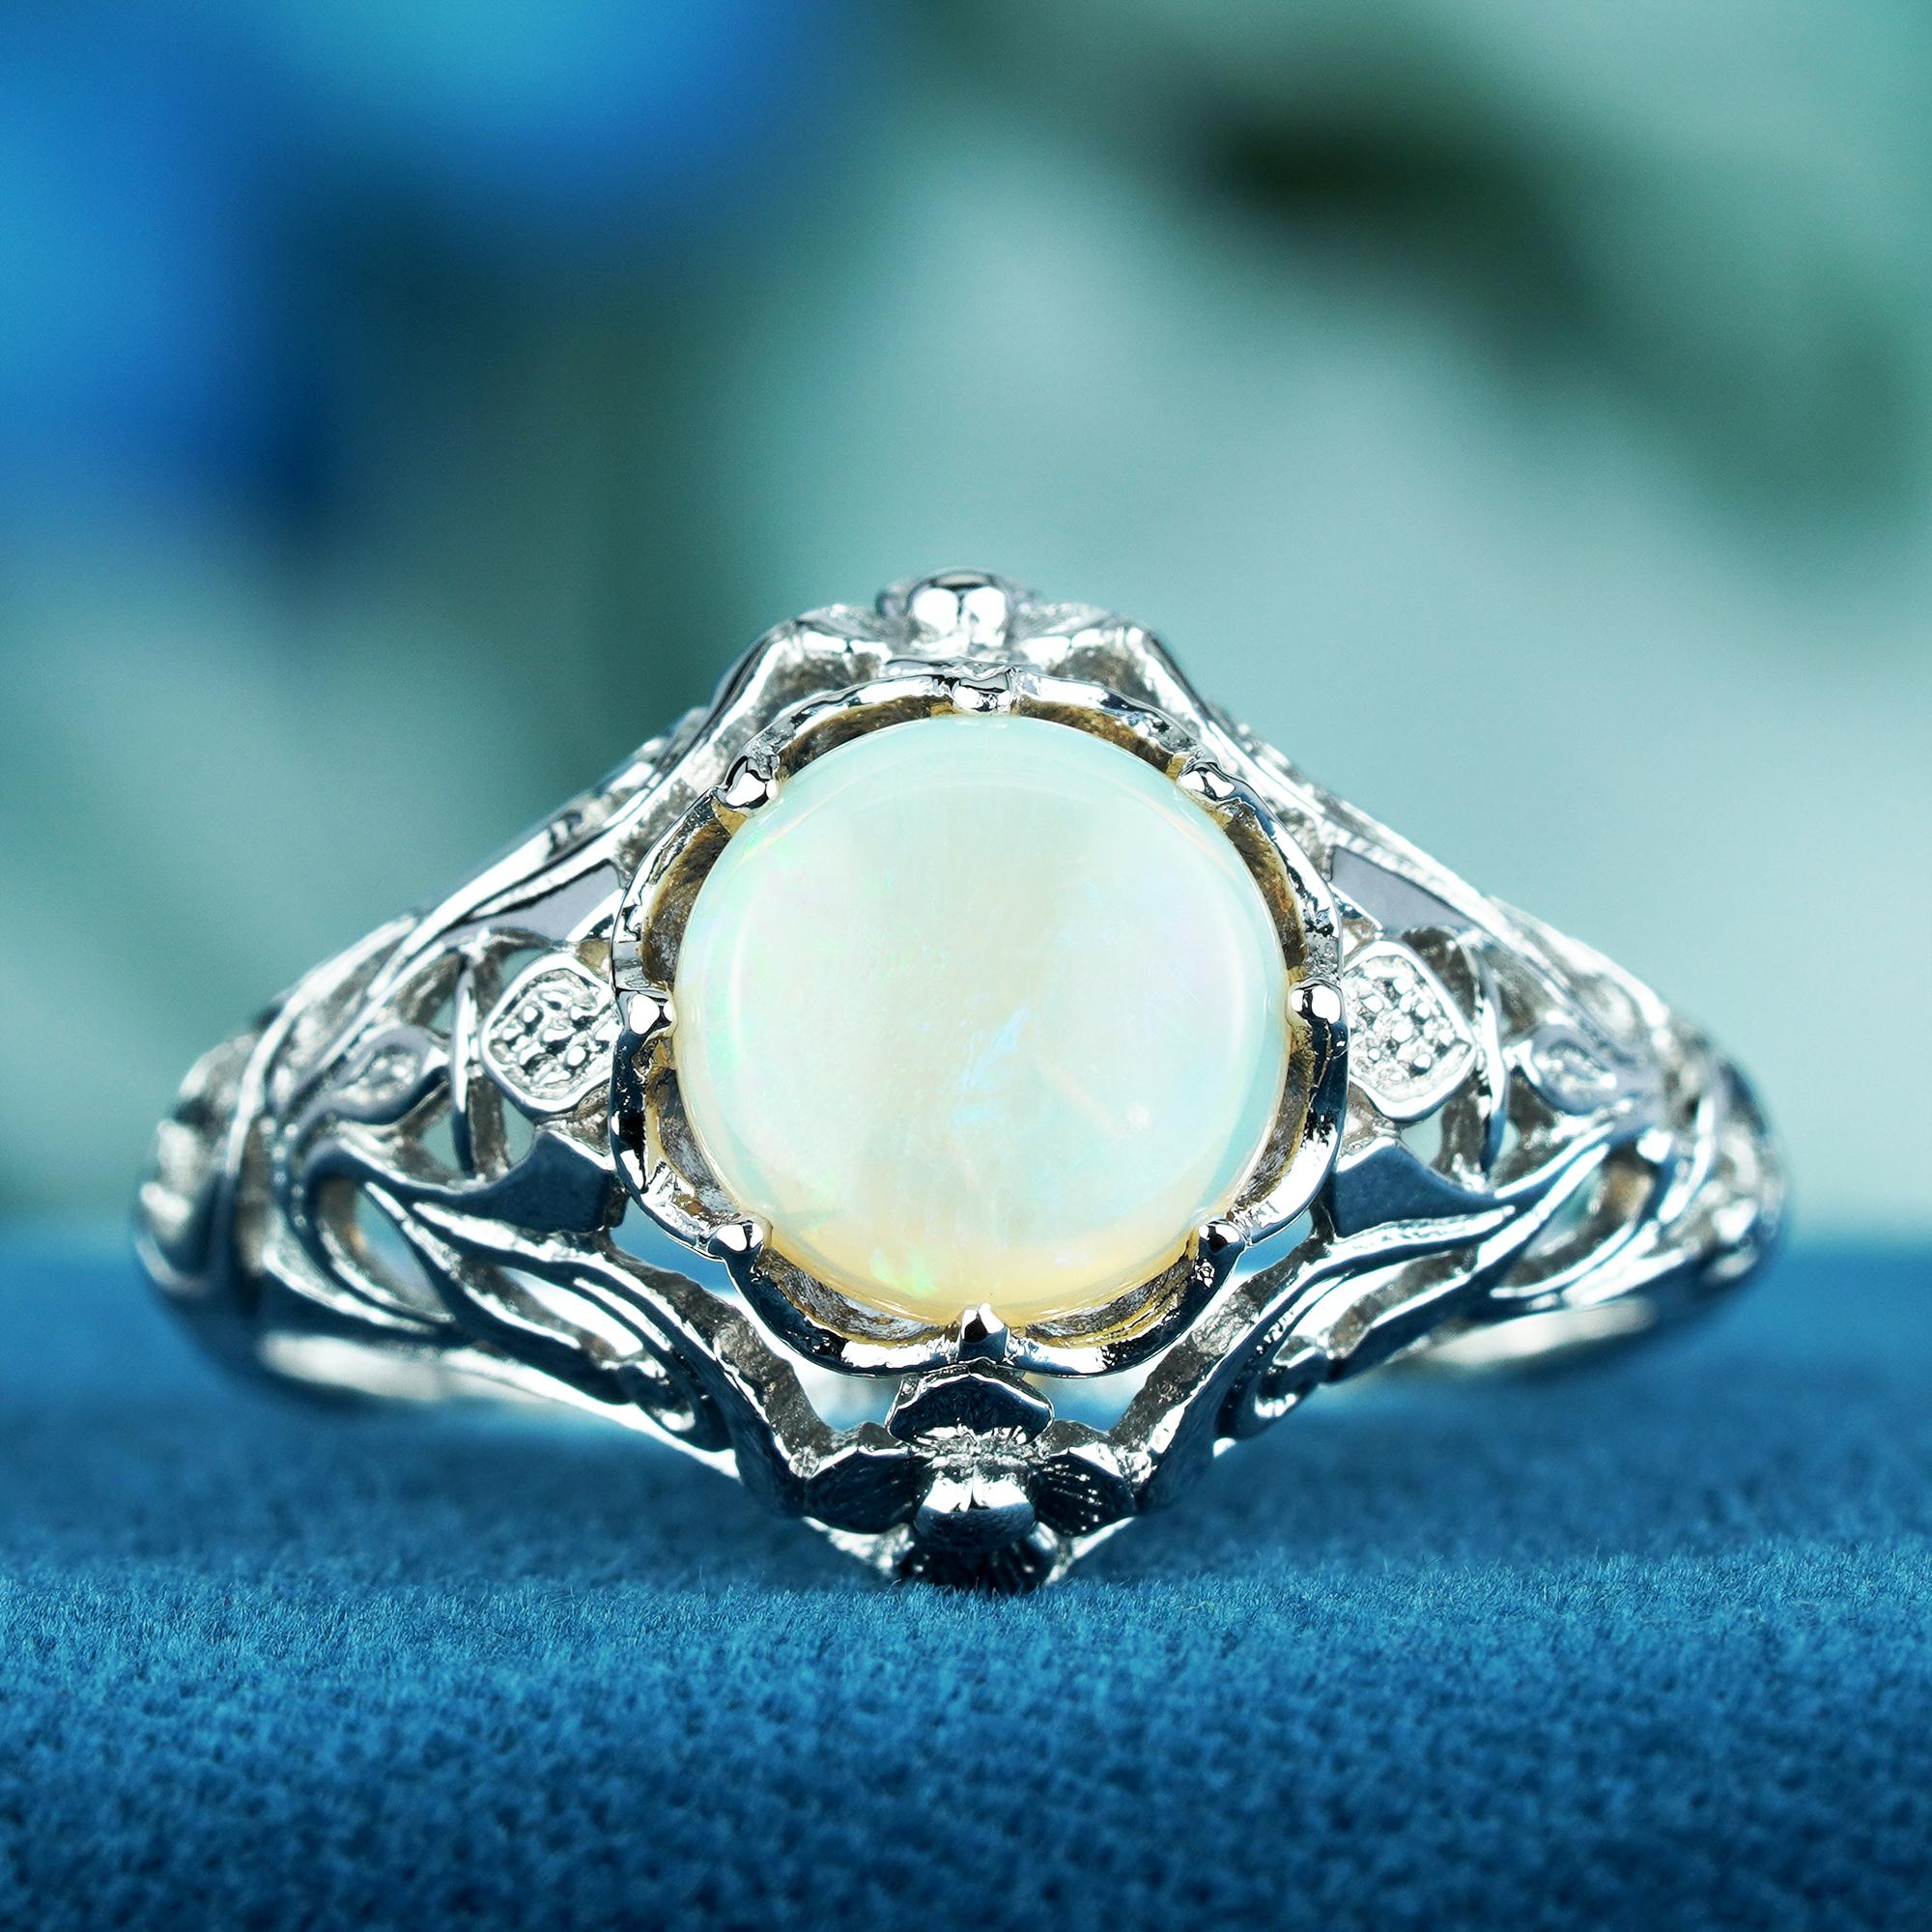 For Sale:  Natural Opal Vintage Style Filigree Solitaire Ring in Solid 9K White Gold 3